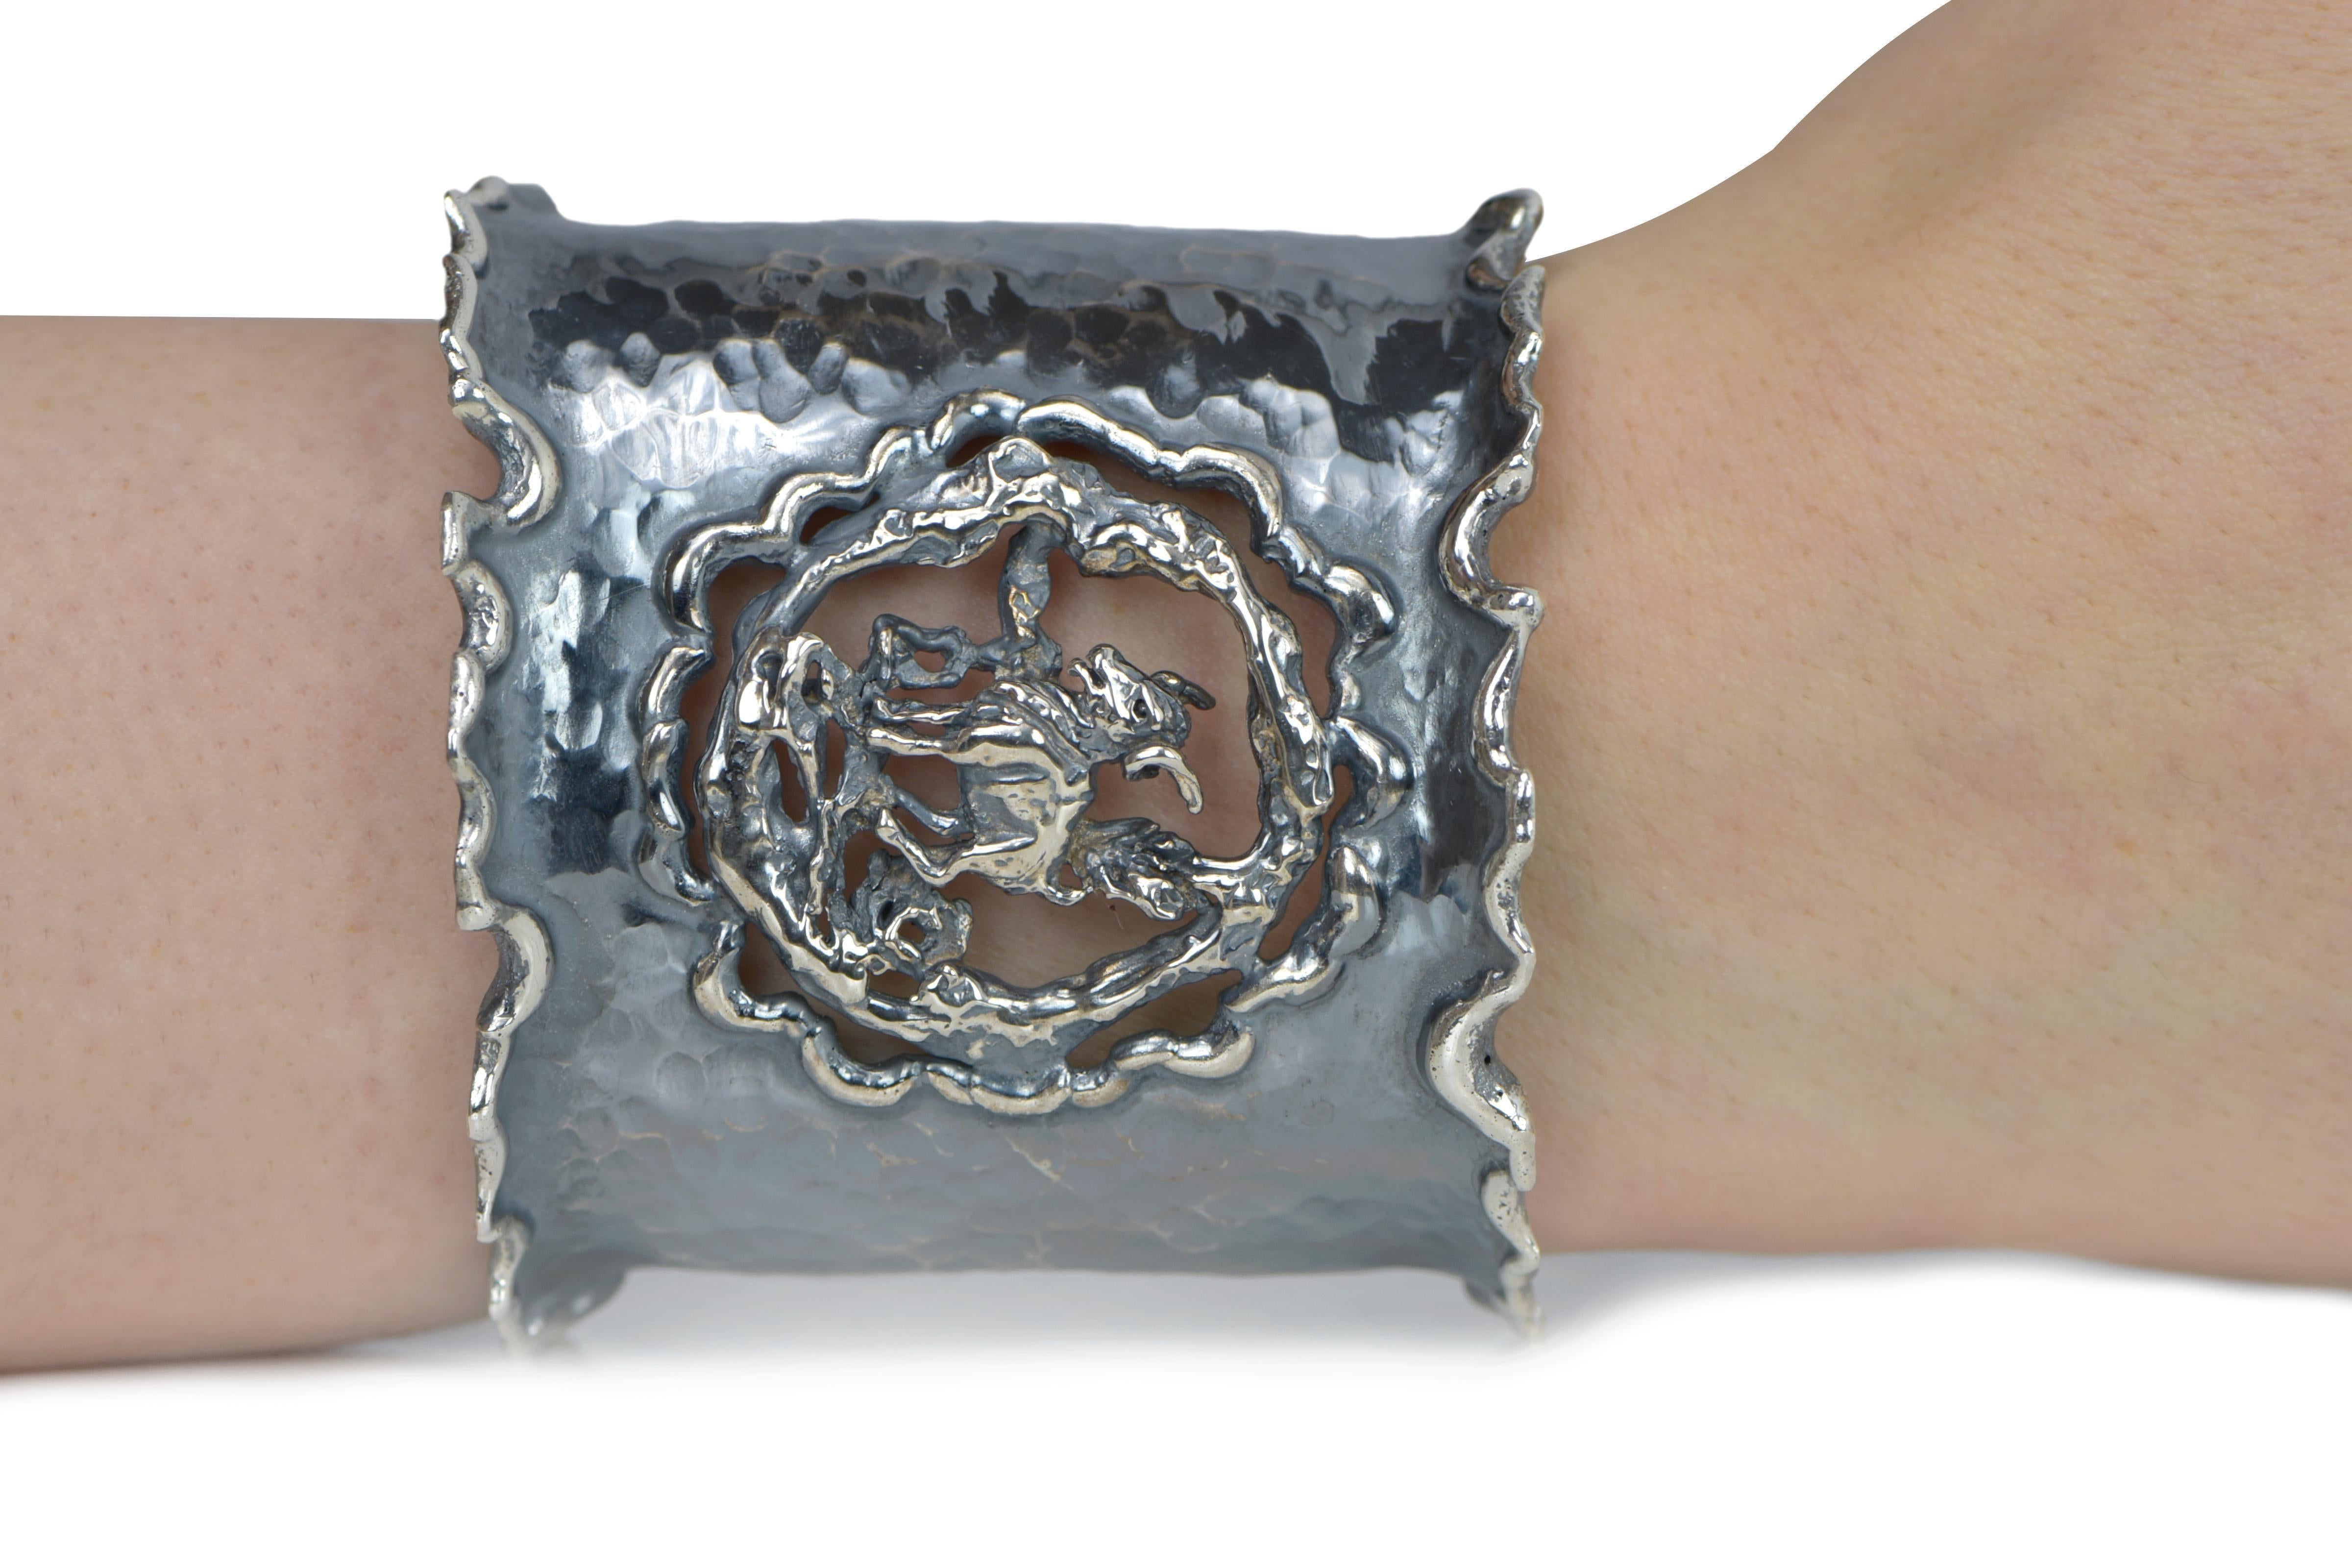 Hand Forged Silver Aries Adjustable Cuff Bracelet. About 2.5 inches wide. The metal does not contain any additional alloys that could compromise the strength or quality of the piece. Each Organic Silver Cuff Bracelet takes about 8 hours to complete,